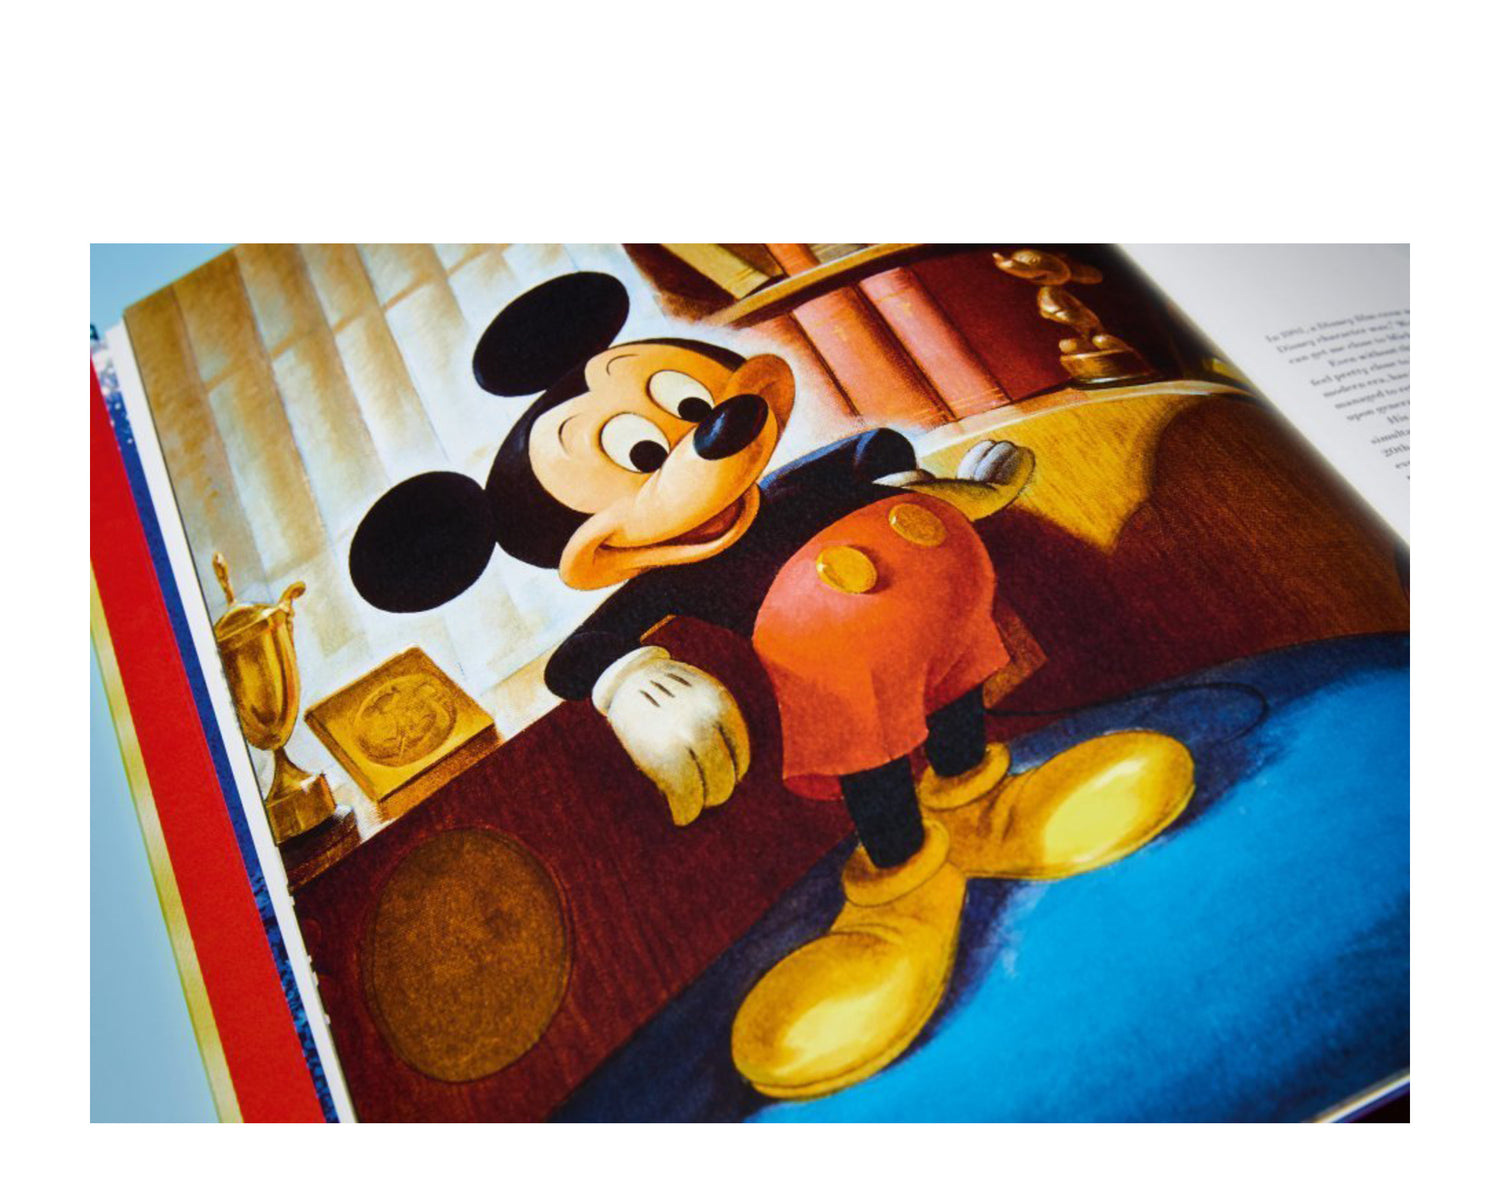 Taschen Books - Walt Disney's Mickey Mouse - The Ultimate History Hardcover Book